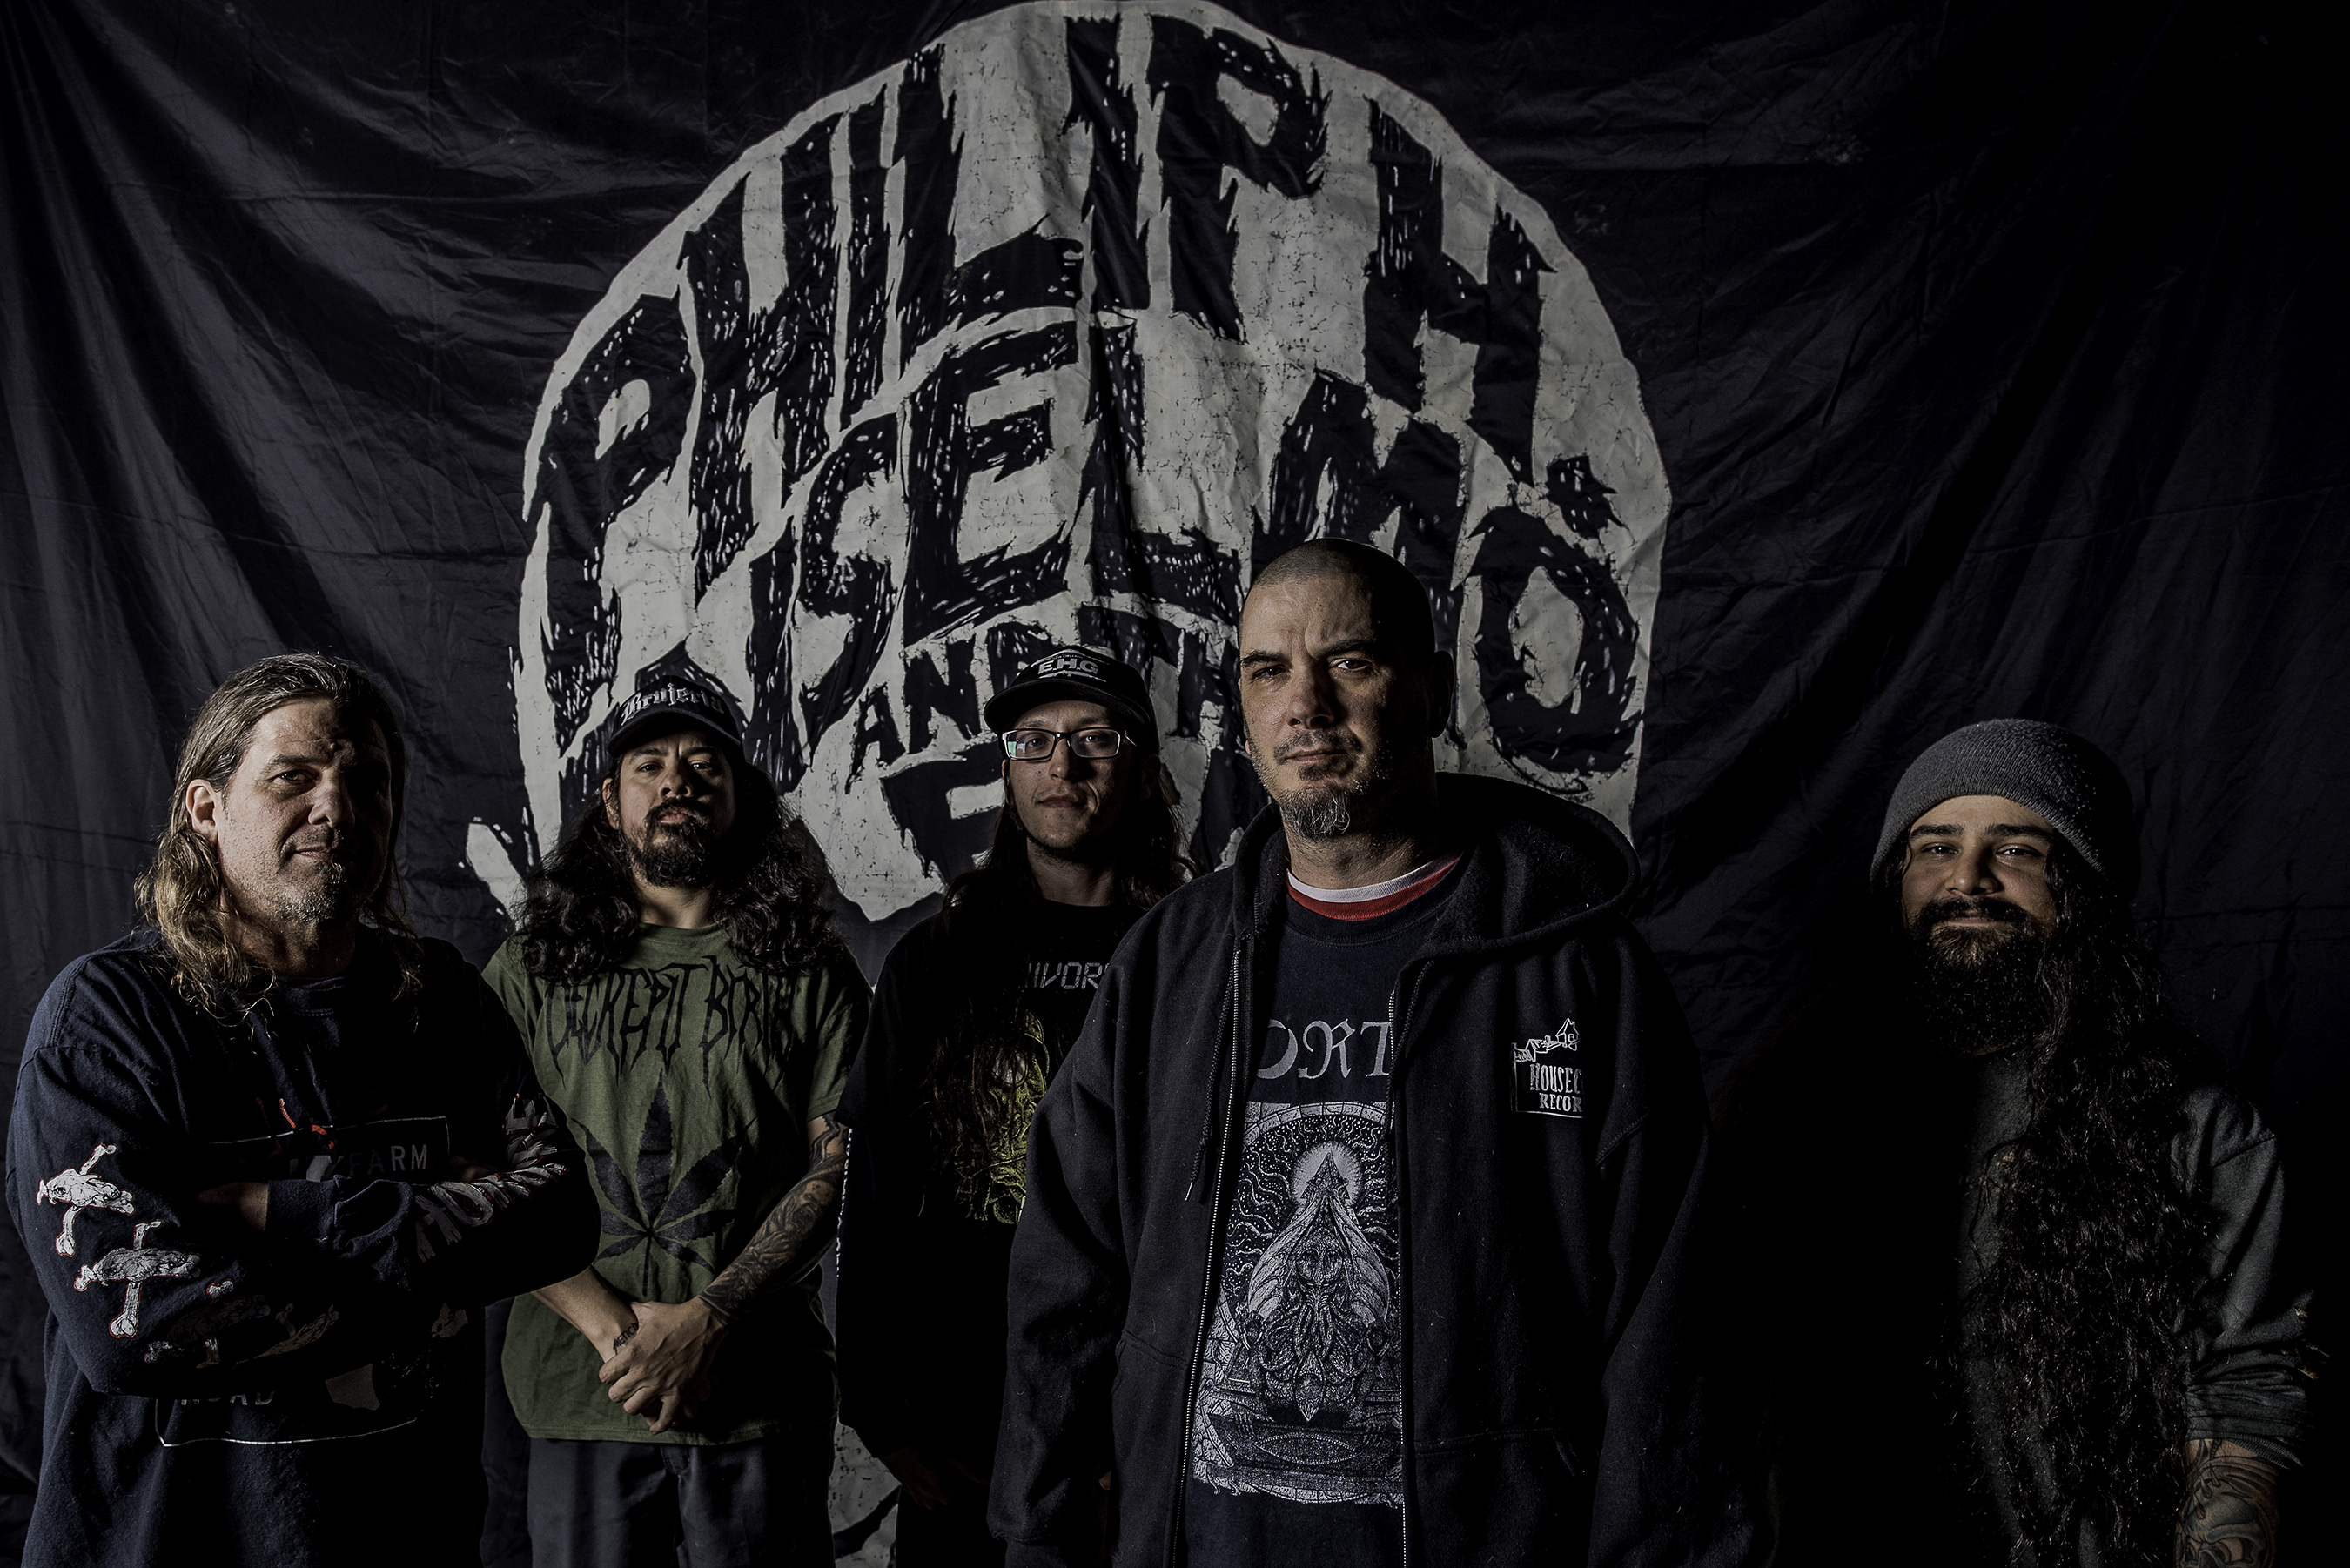 Interview with Mike DeLeon (Philip H. Anselmo & The Illegals)2700 x 1802